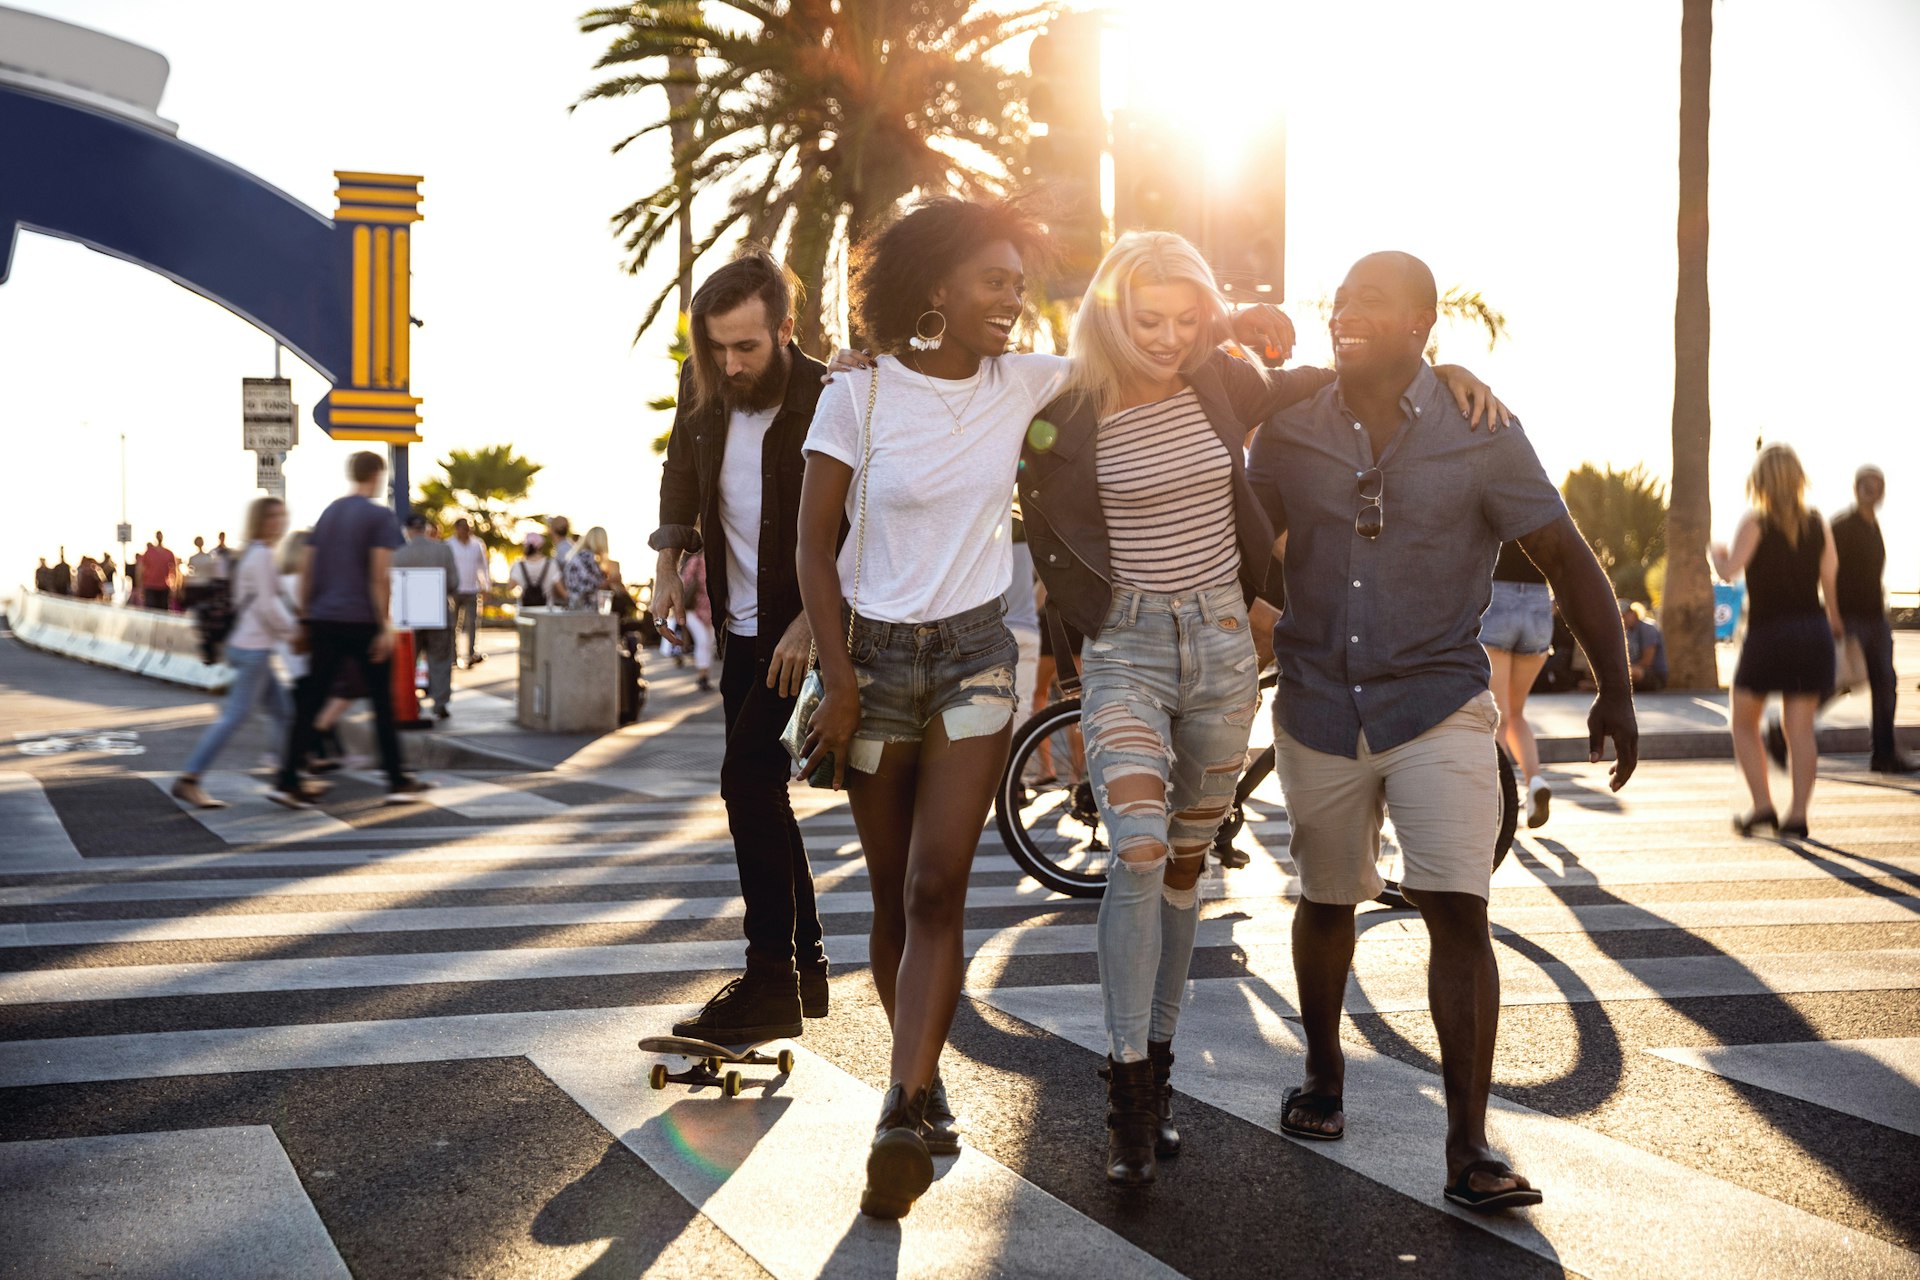  A group of friend laughing as they walk along a street in Santa Monica